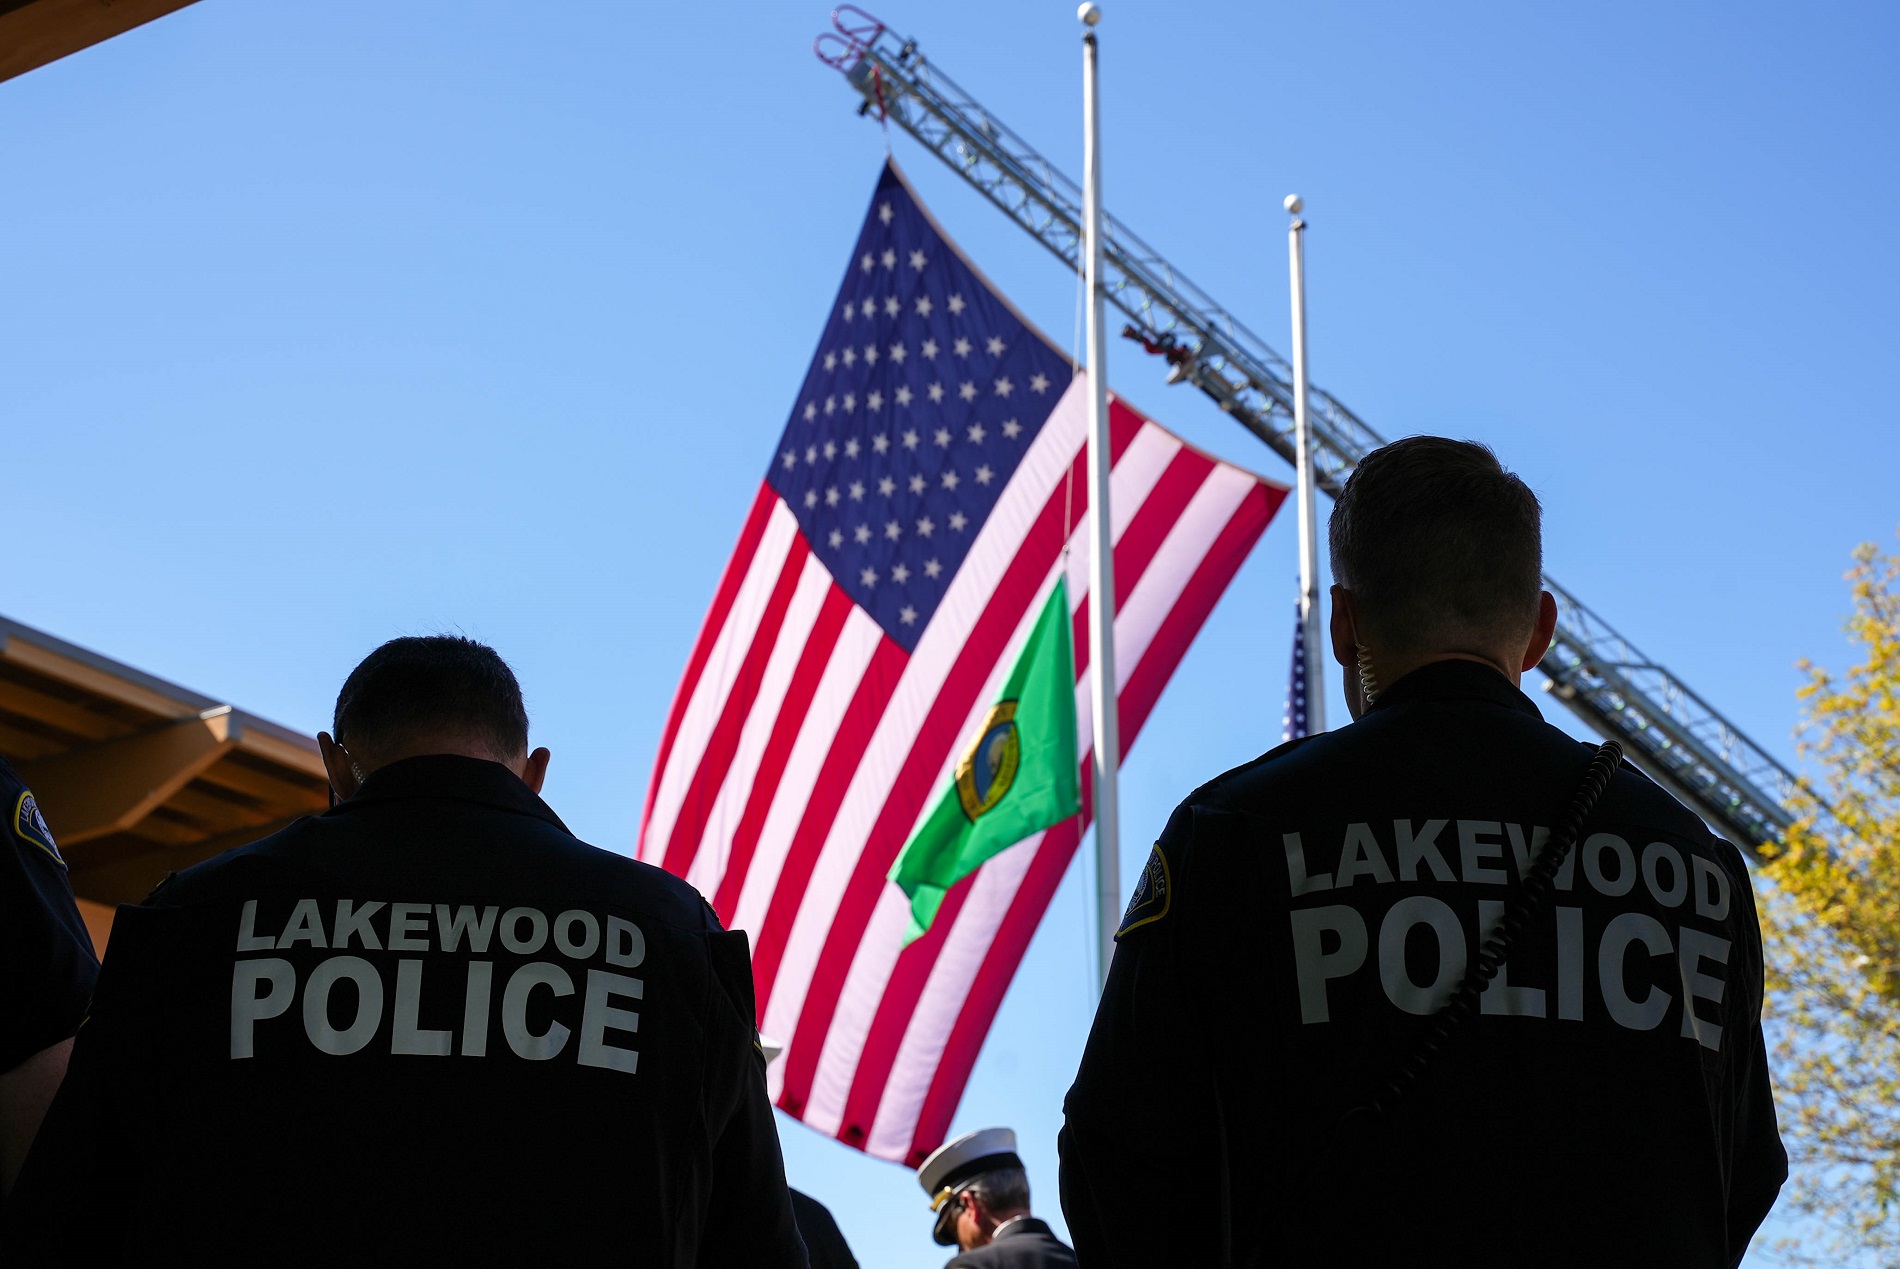 The American flag flies from a fire truck ladder overhead at Lakewood City Hall. In the foreground two Lakewood Police officers are silhouetted against the blue sky.